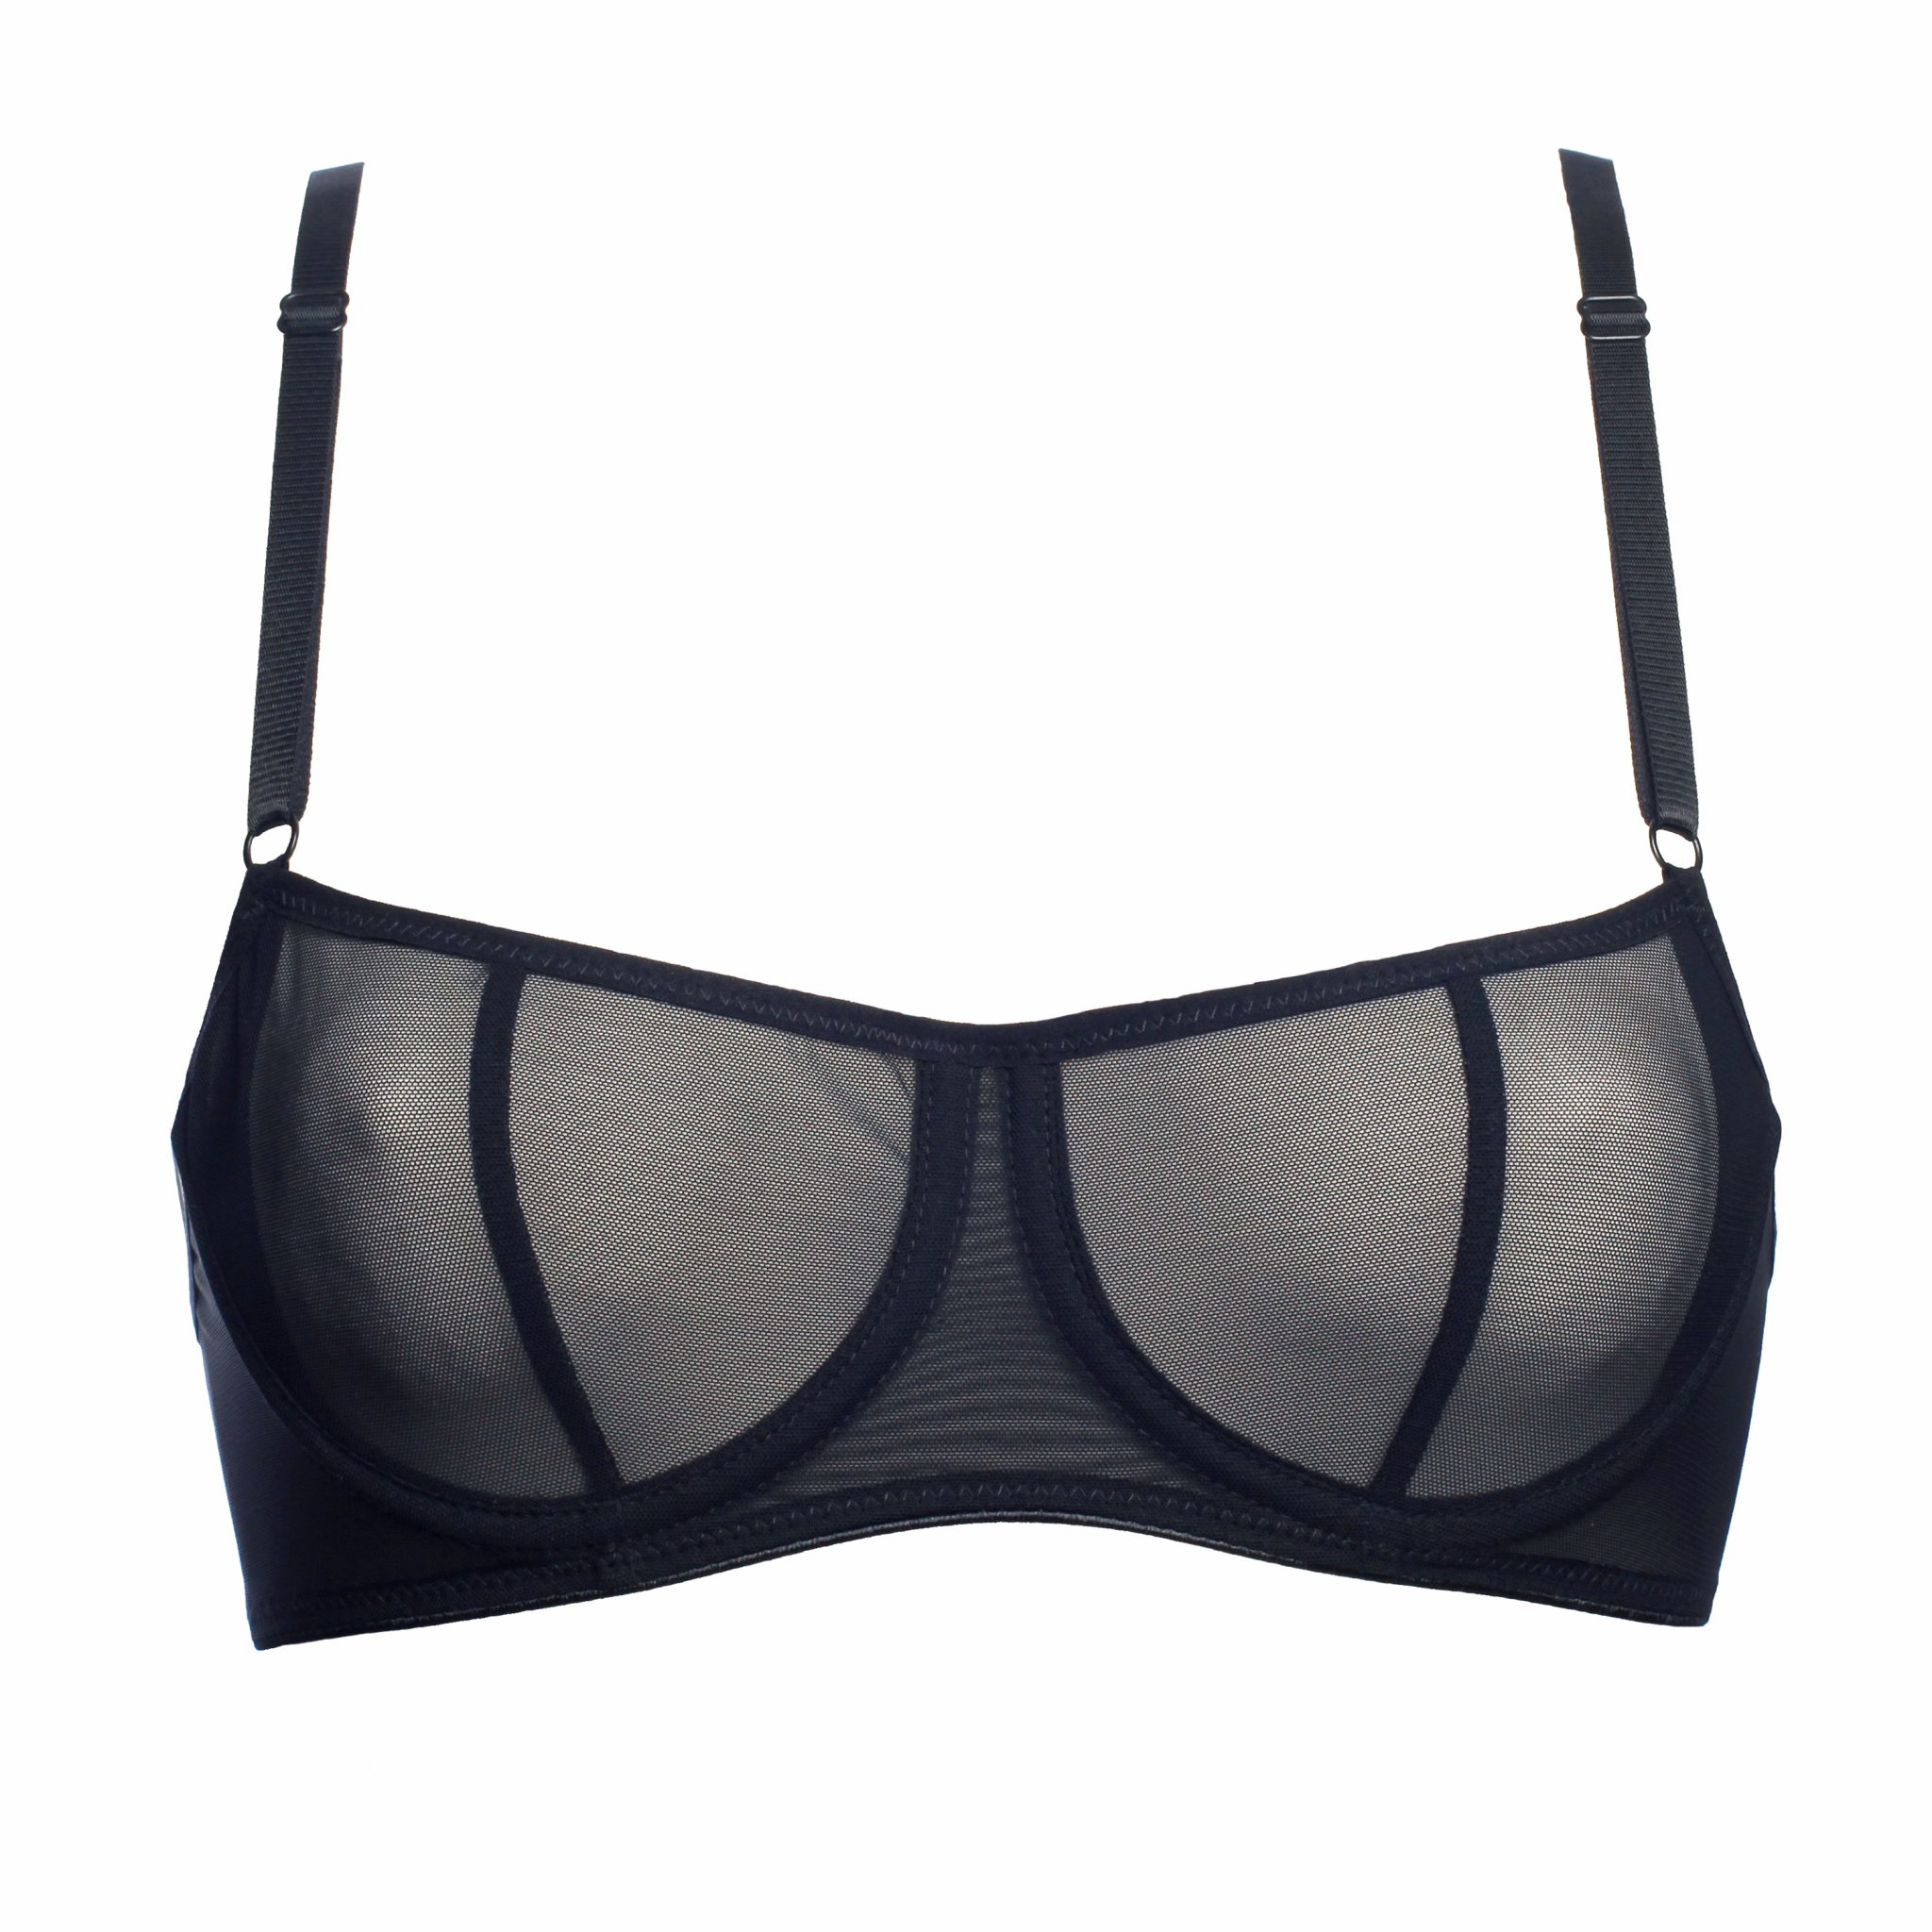 Black Mesh Basic underwire Bra by Flash you and me Lingerie